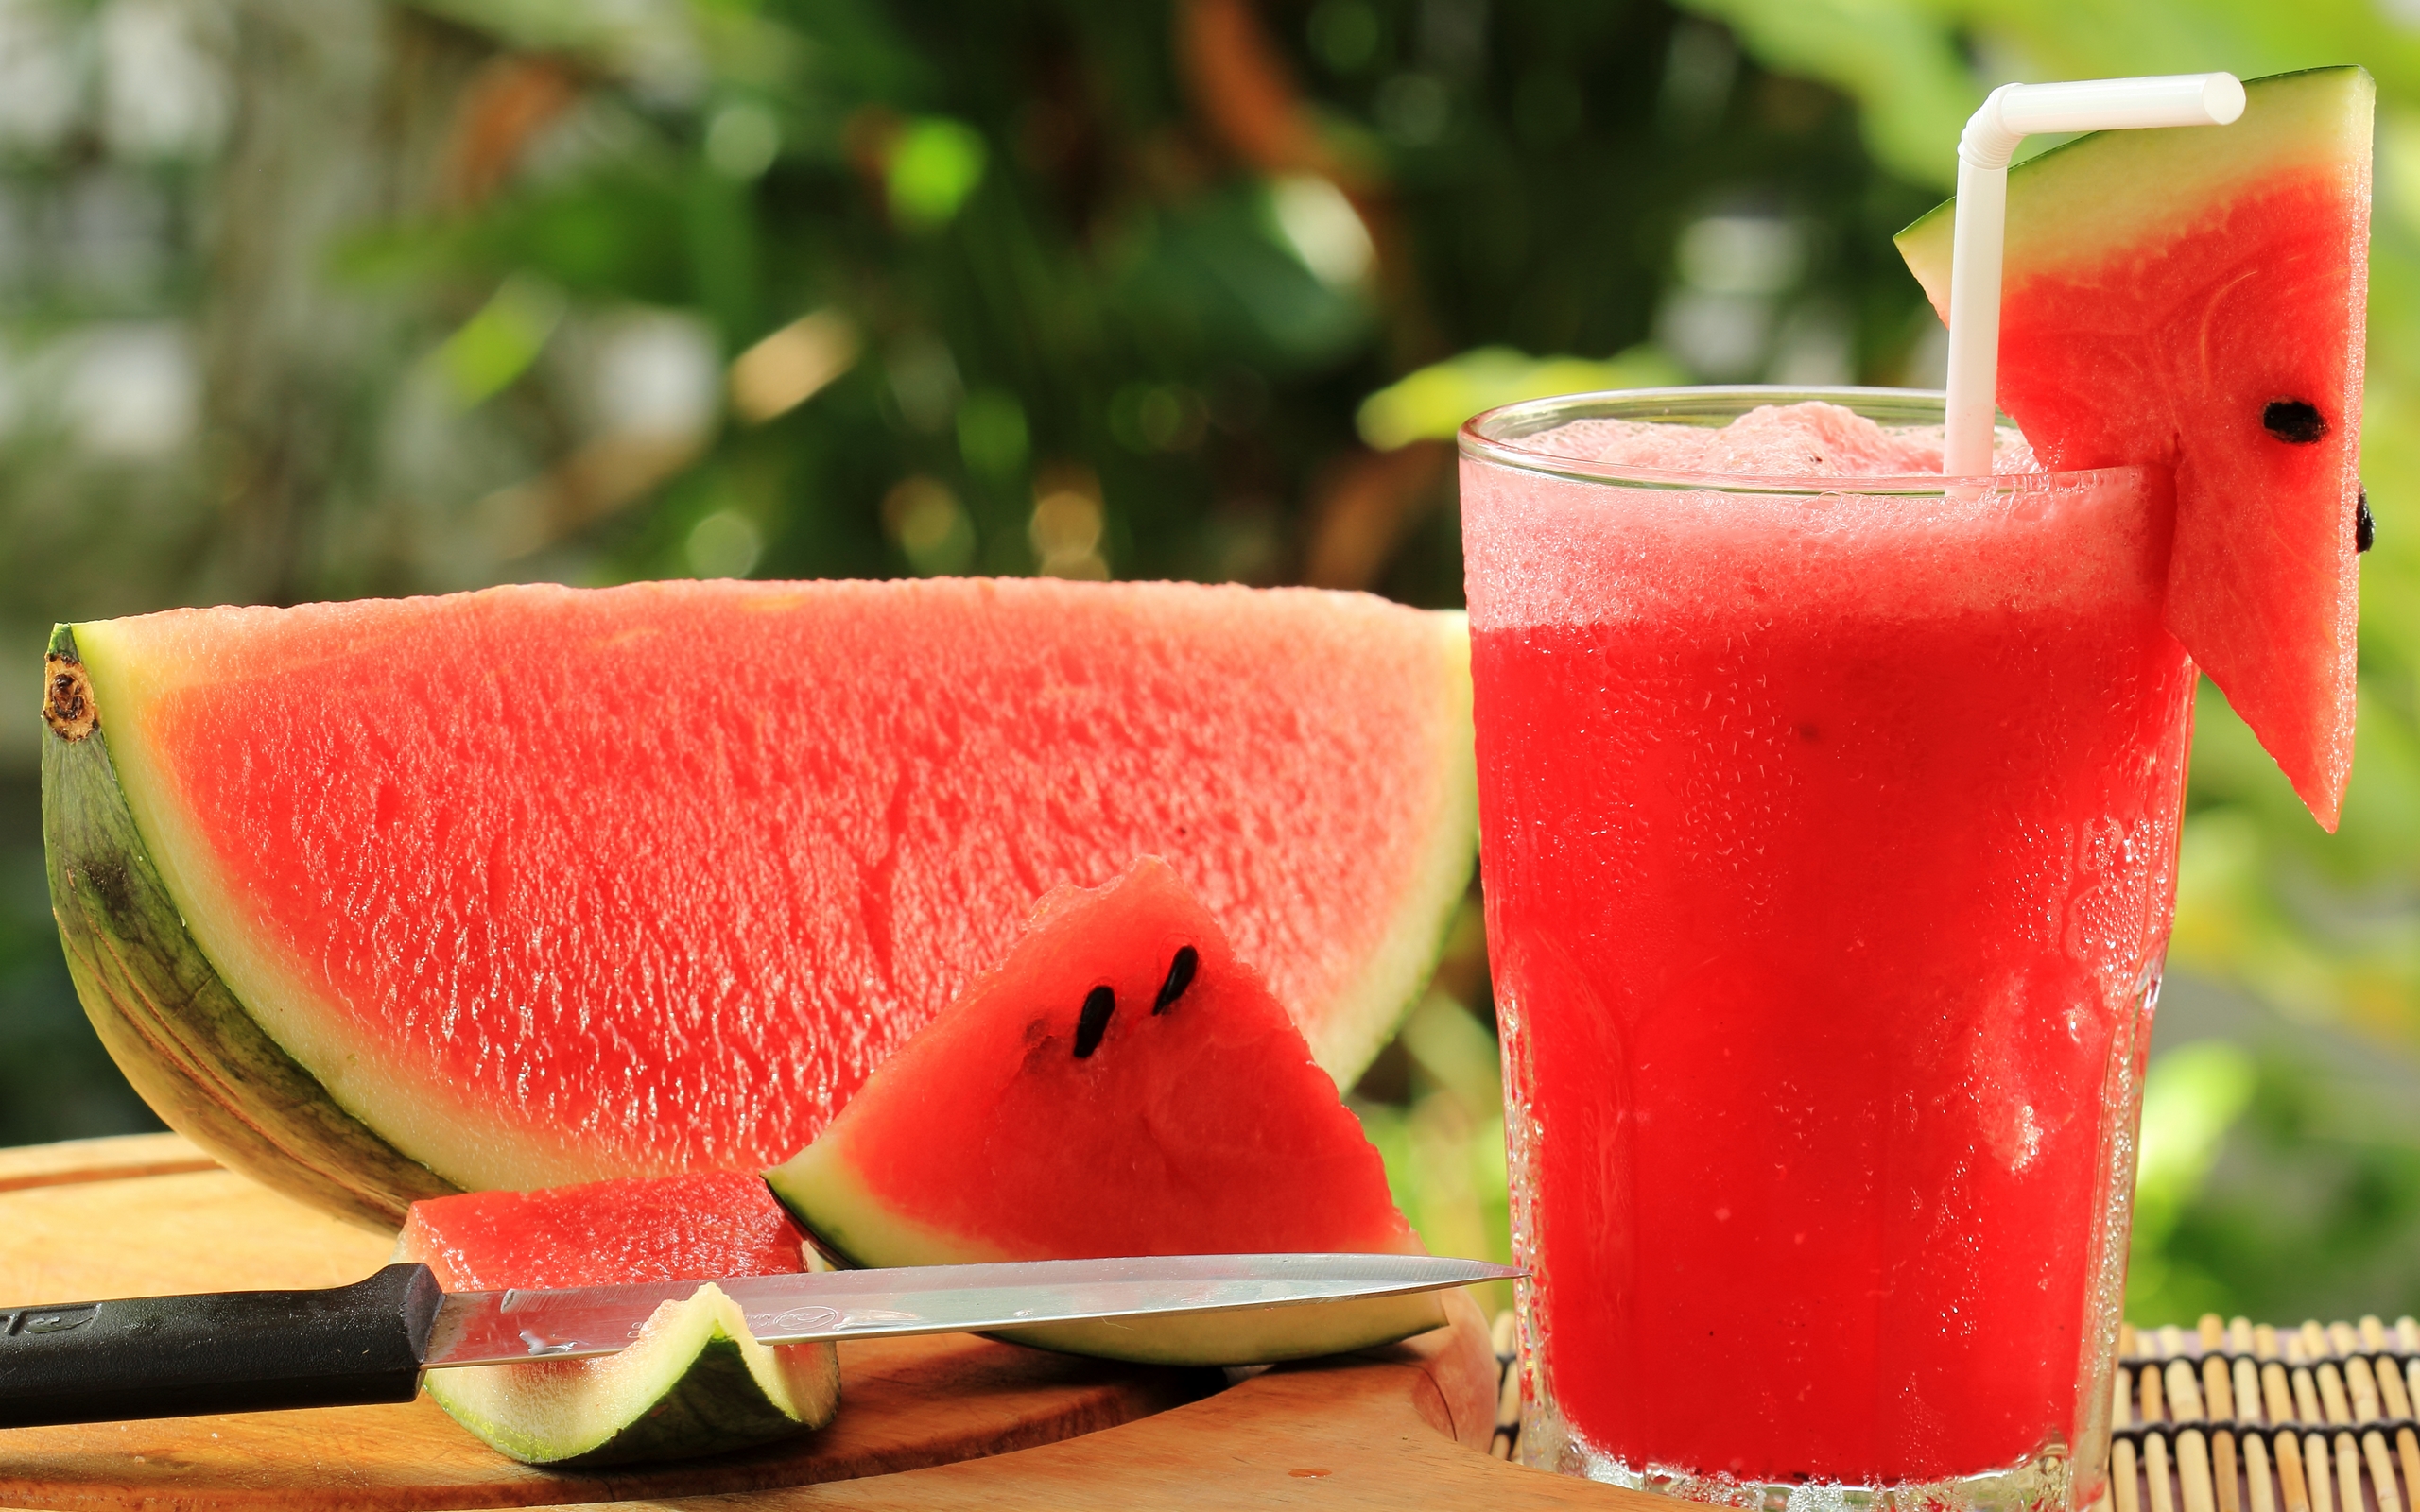 Download a free photo about juice watermelon glass. 